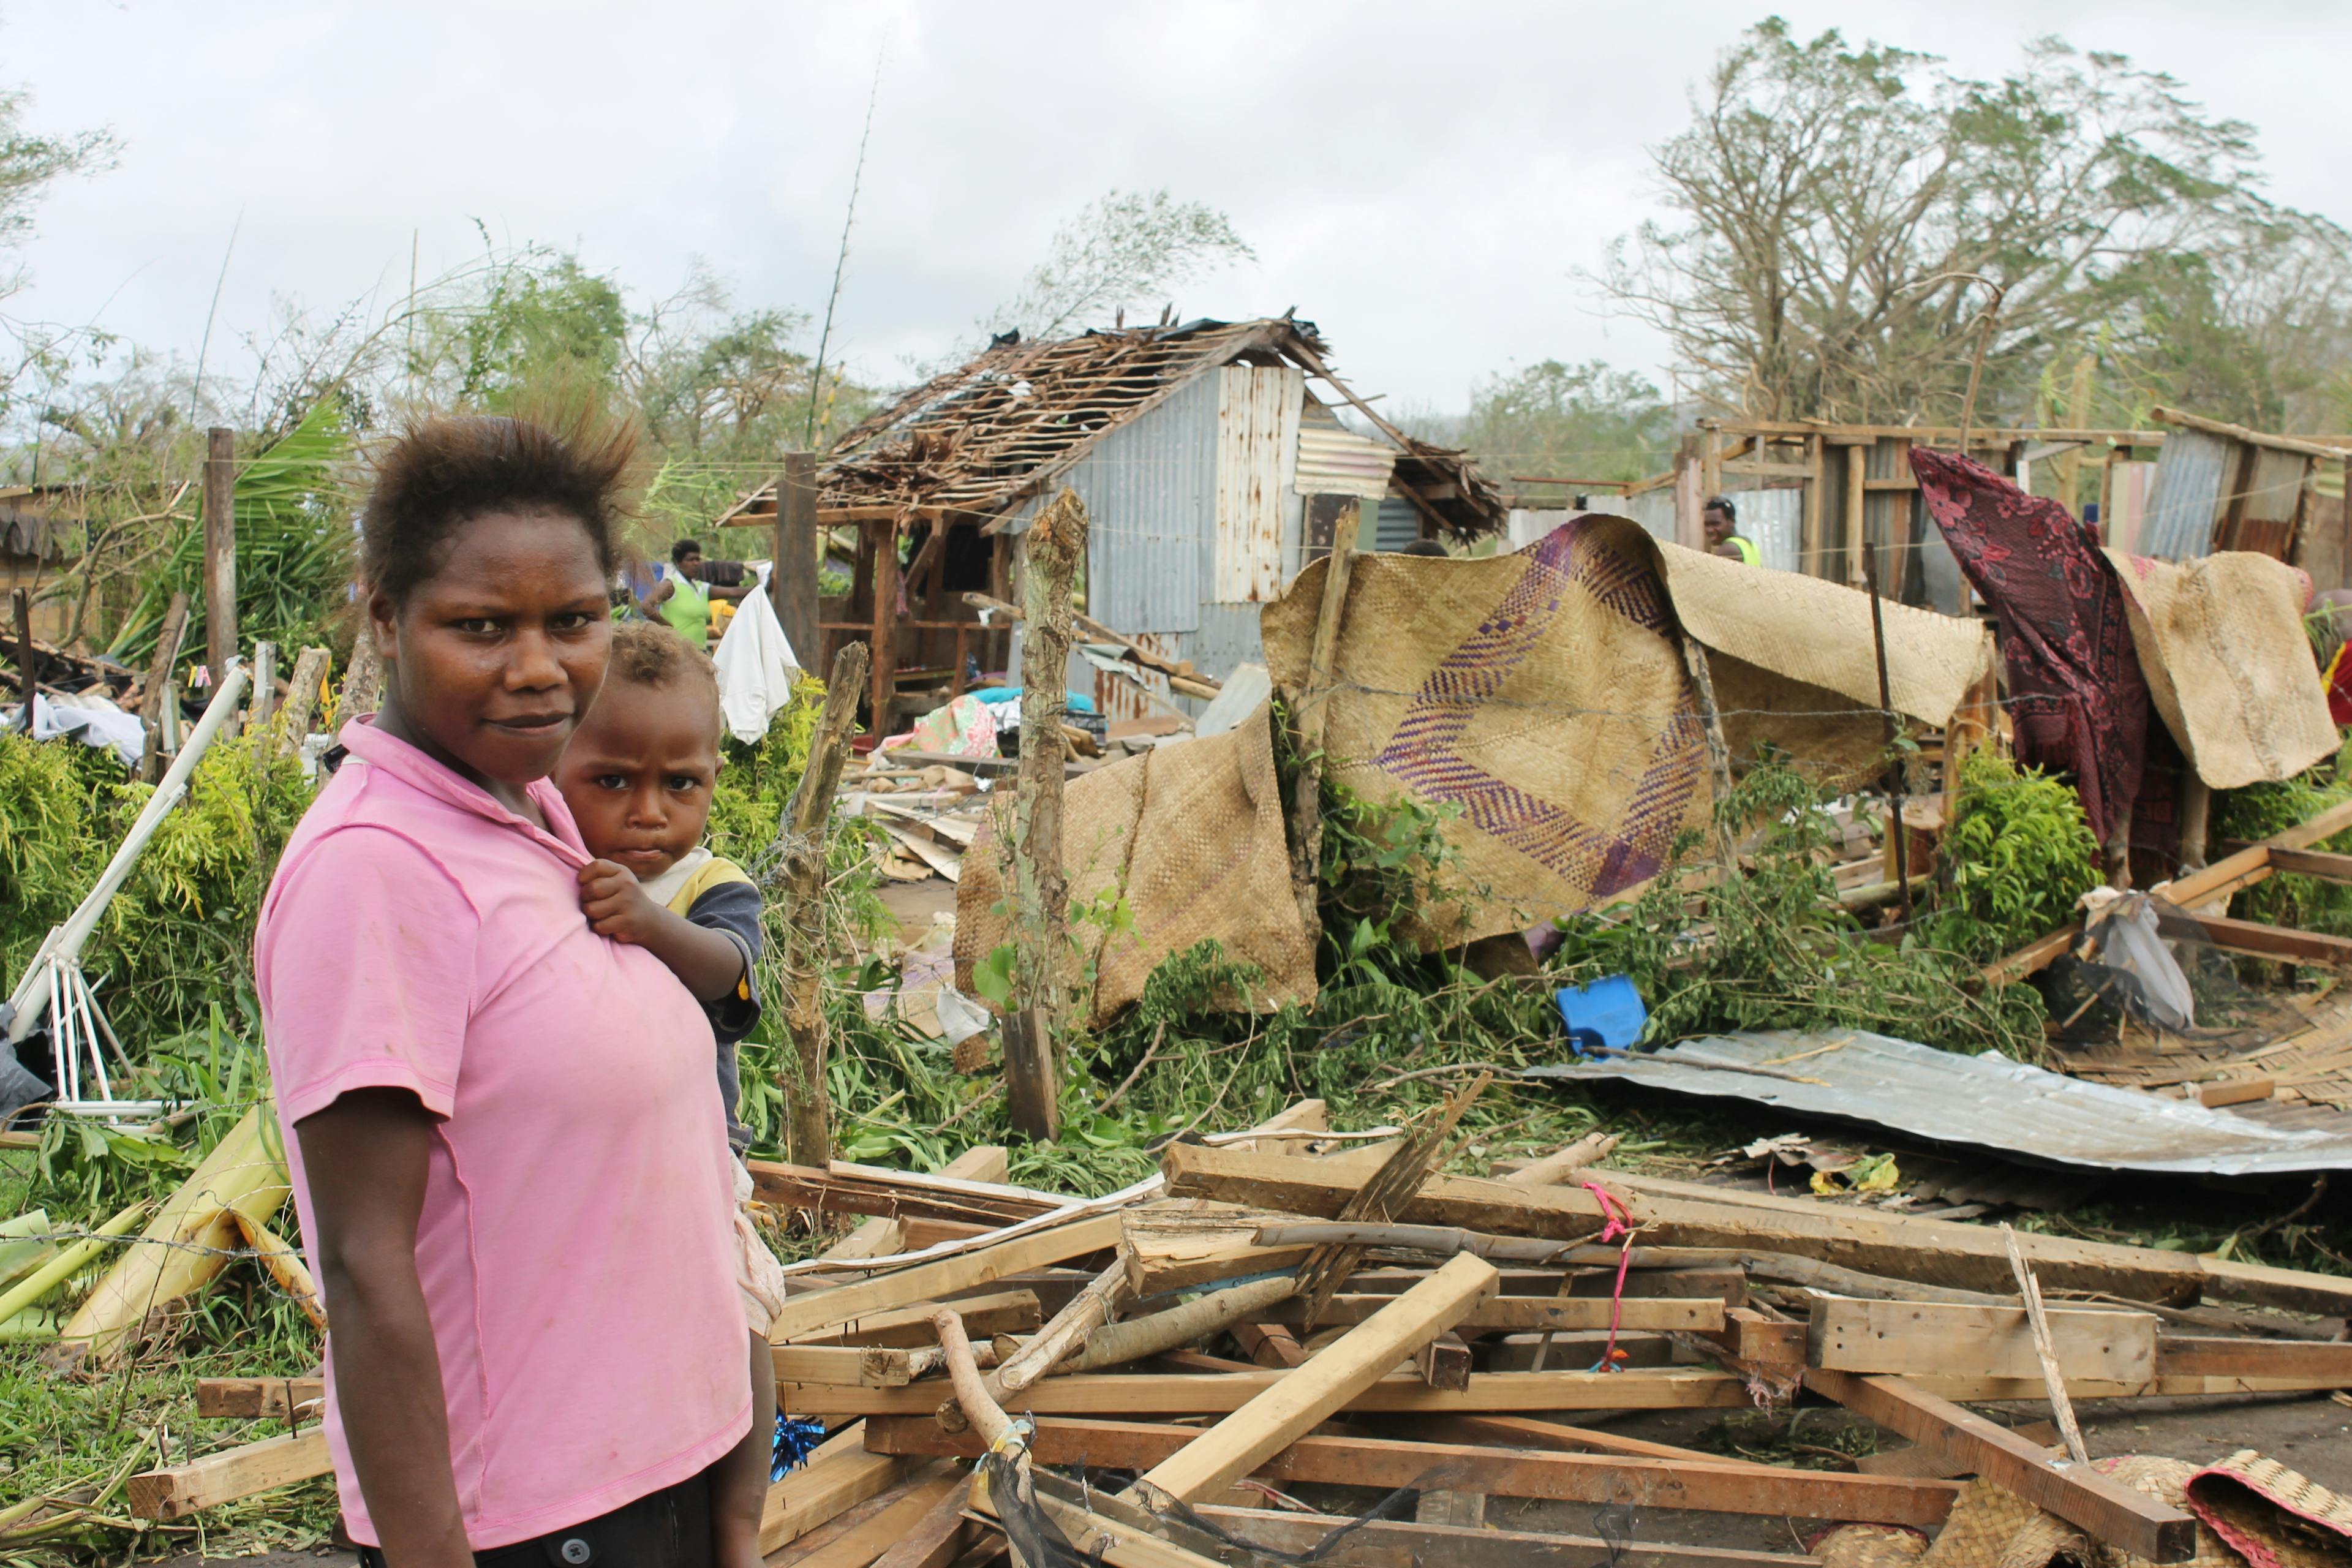 Marie and her son Ceriel (11 months) outside their home in Taunono village that was destroyed by Cyclone Pam

